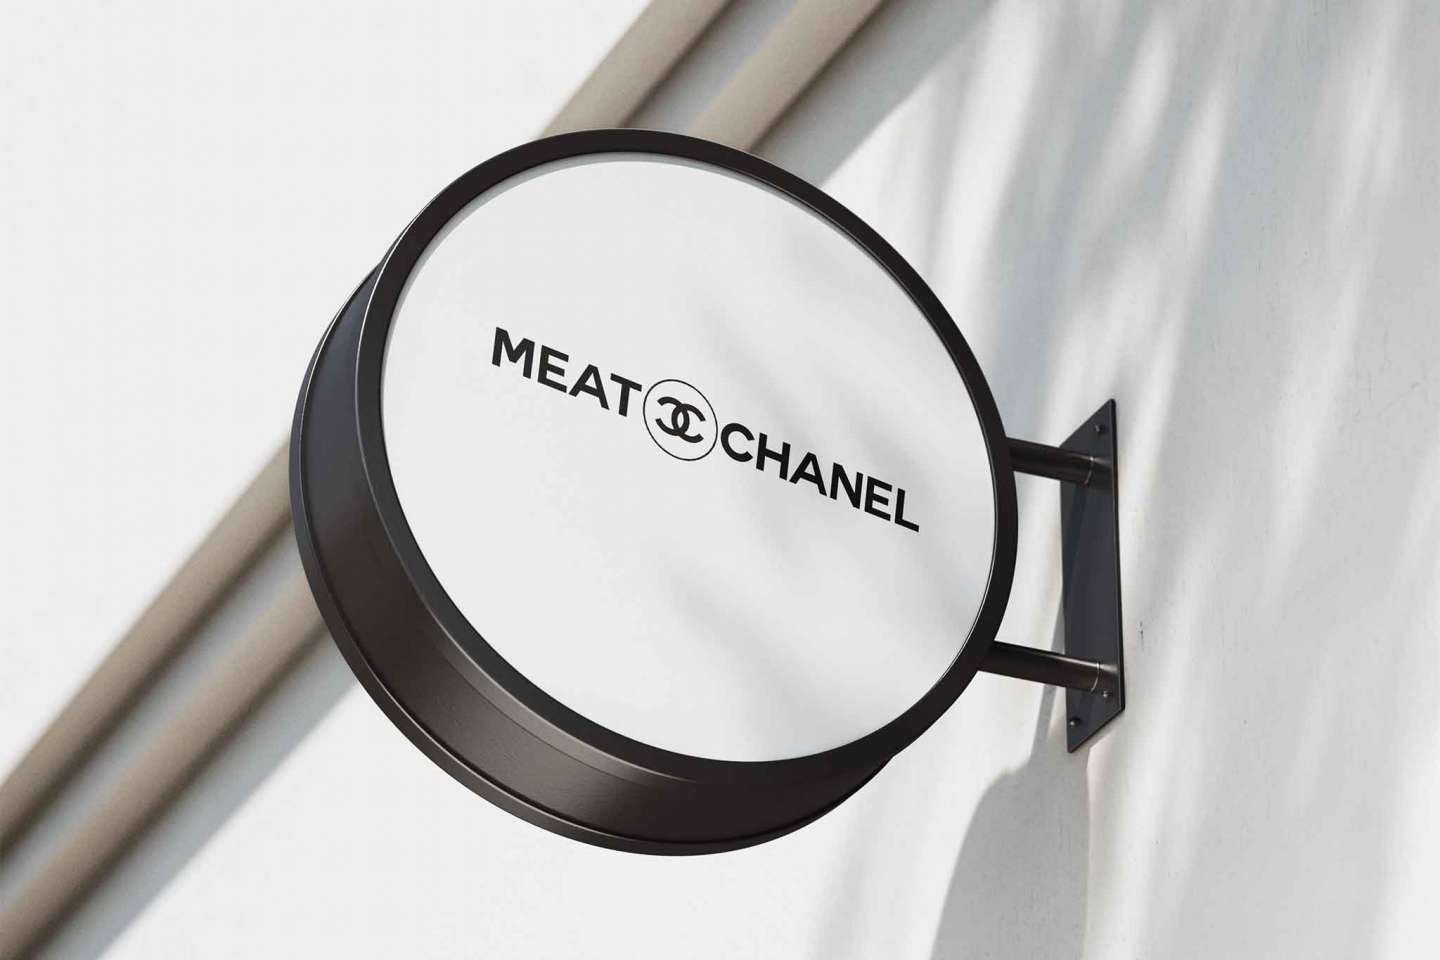 MEAT CHANEL 